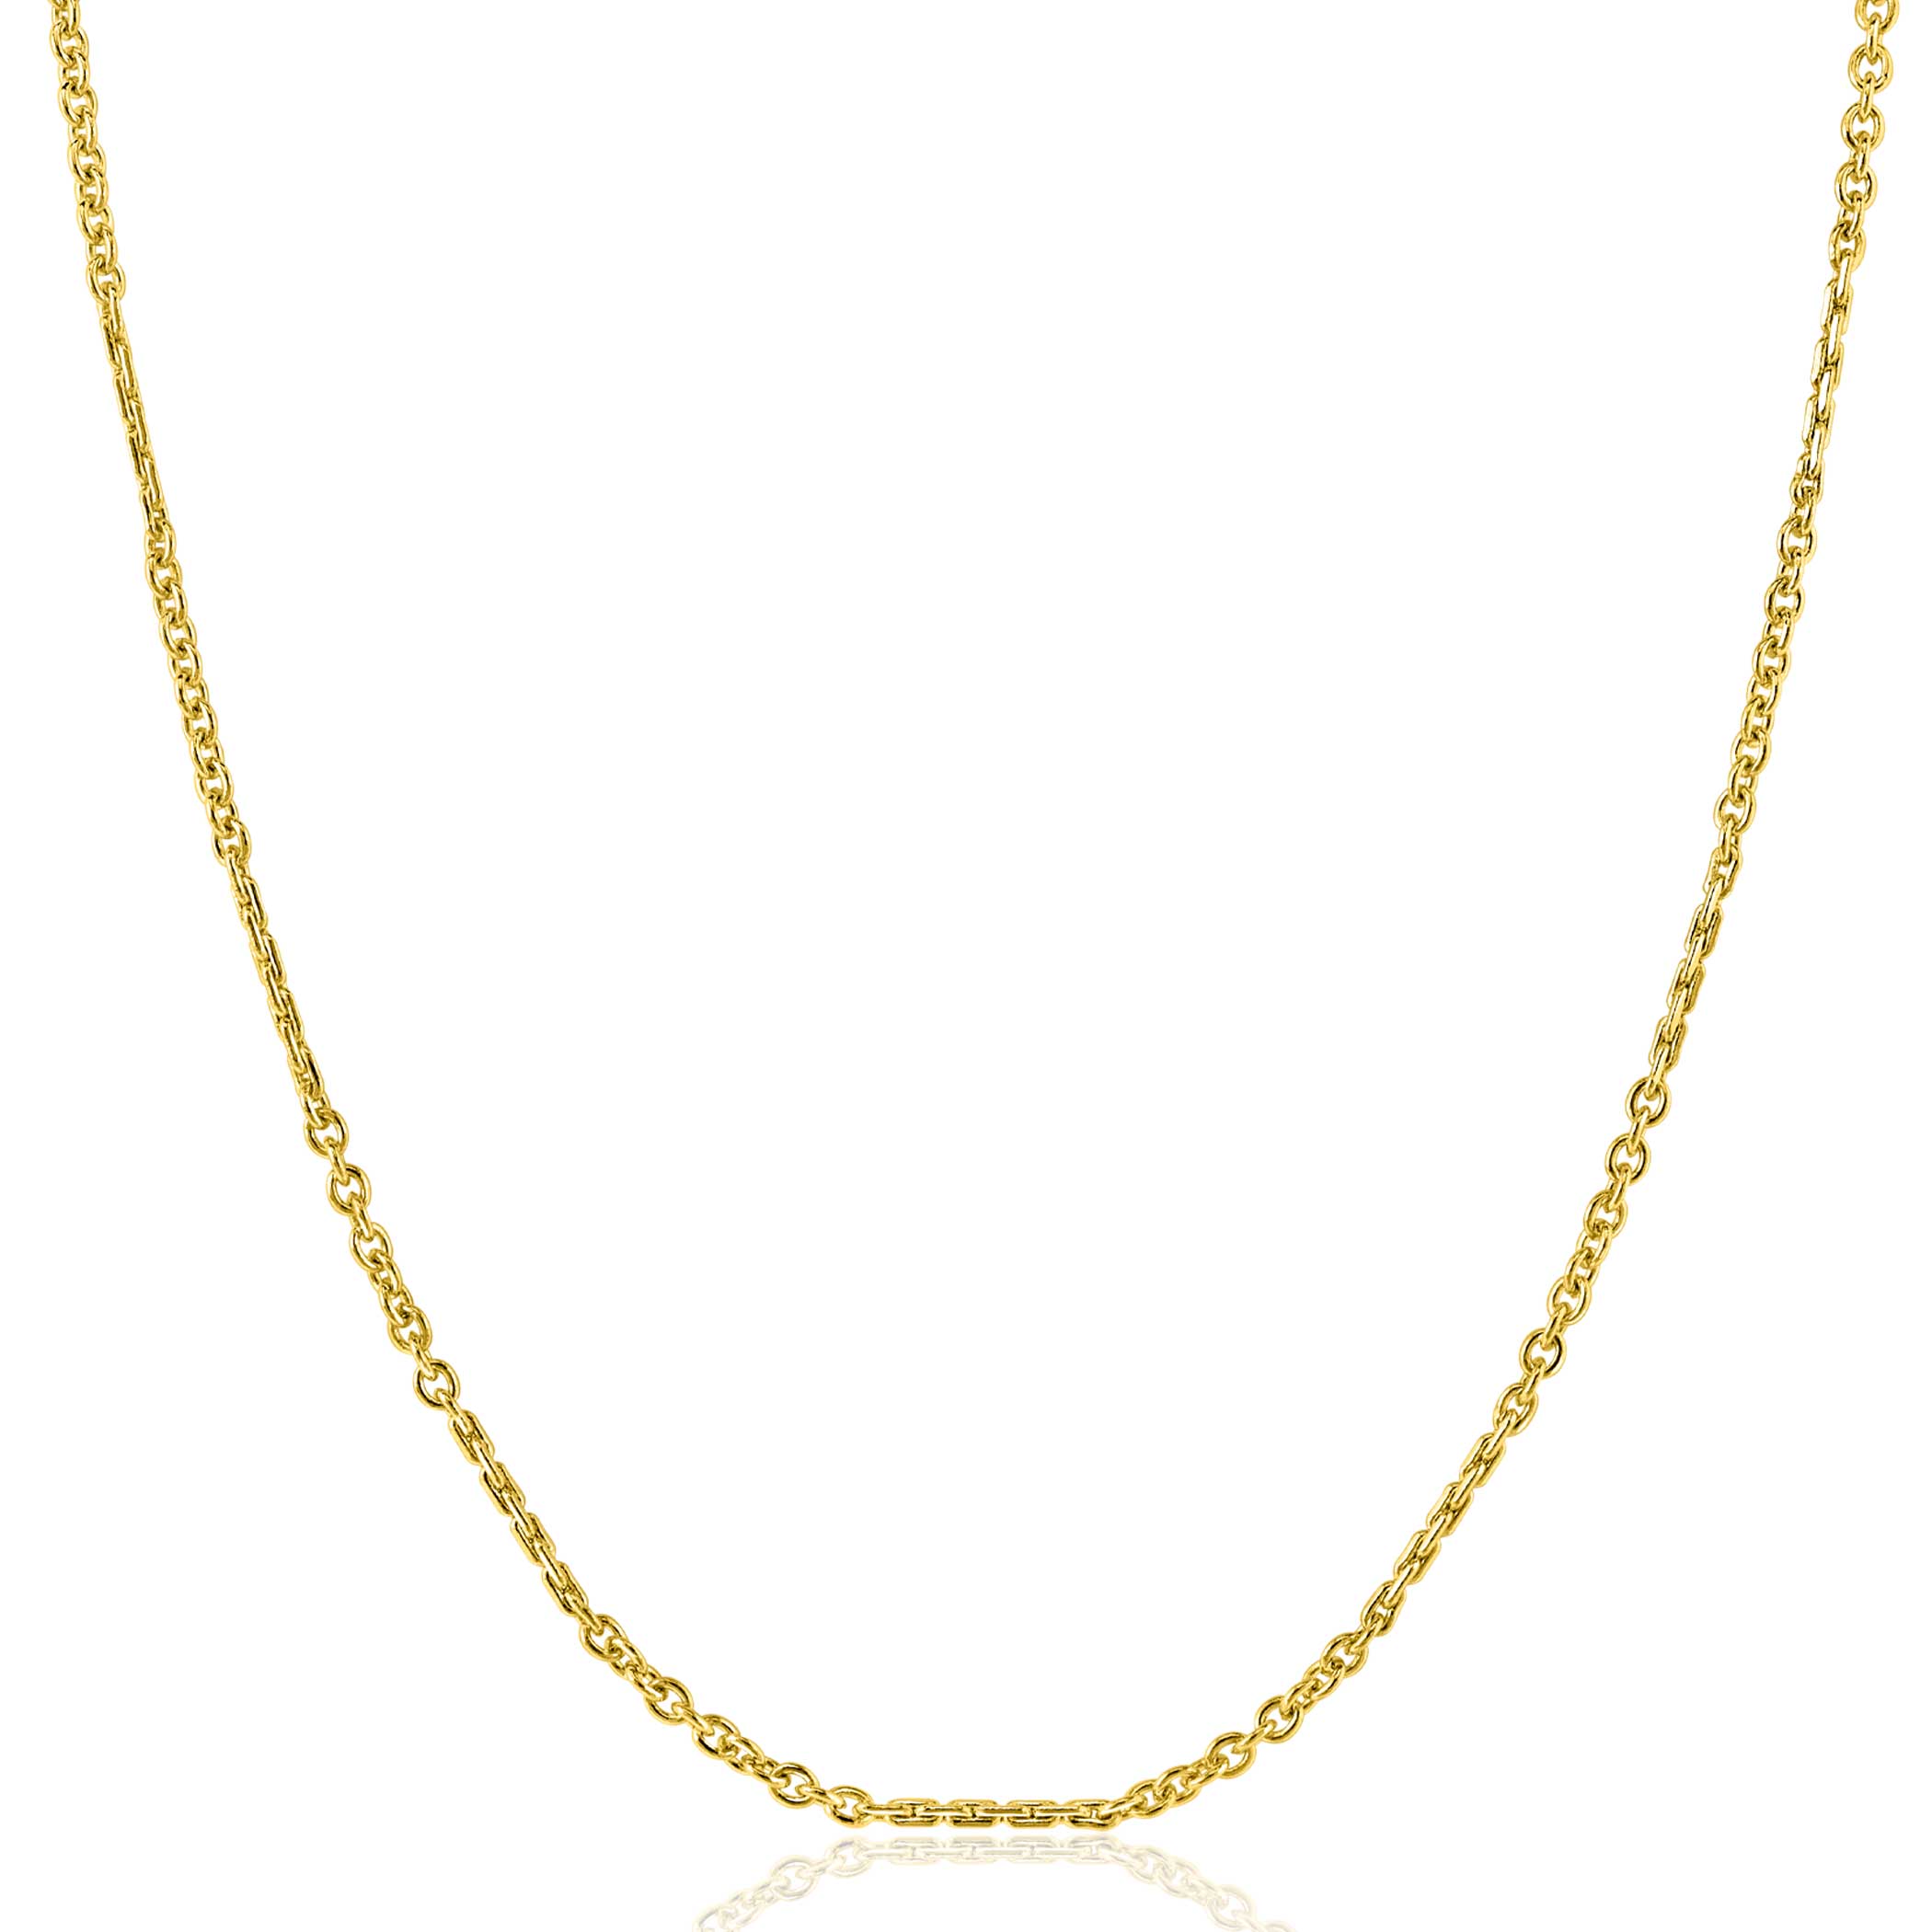 ZINZI Gold 14 carat solid gold necklace with crafted twisted bars and fine jasseron links, 2mm wide, 41-43cm ZGC500
